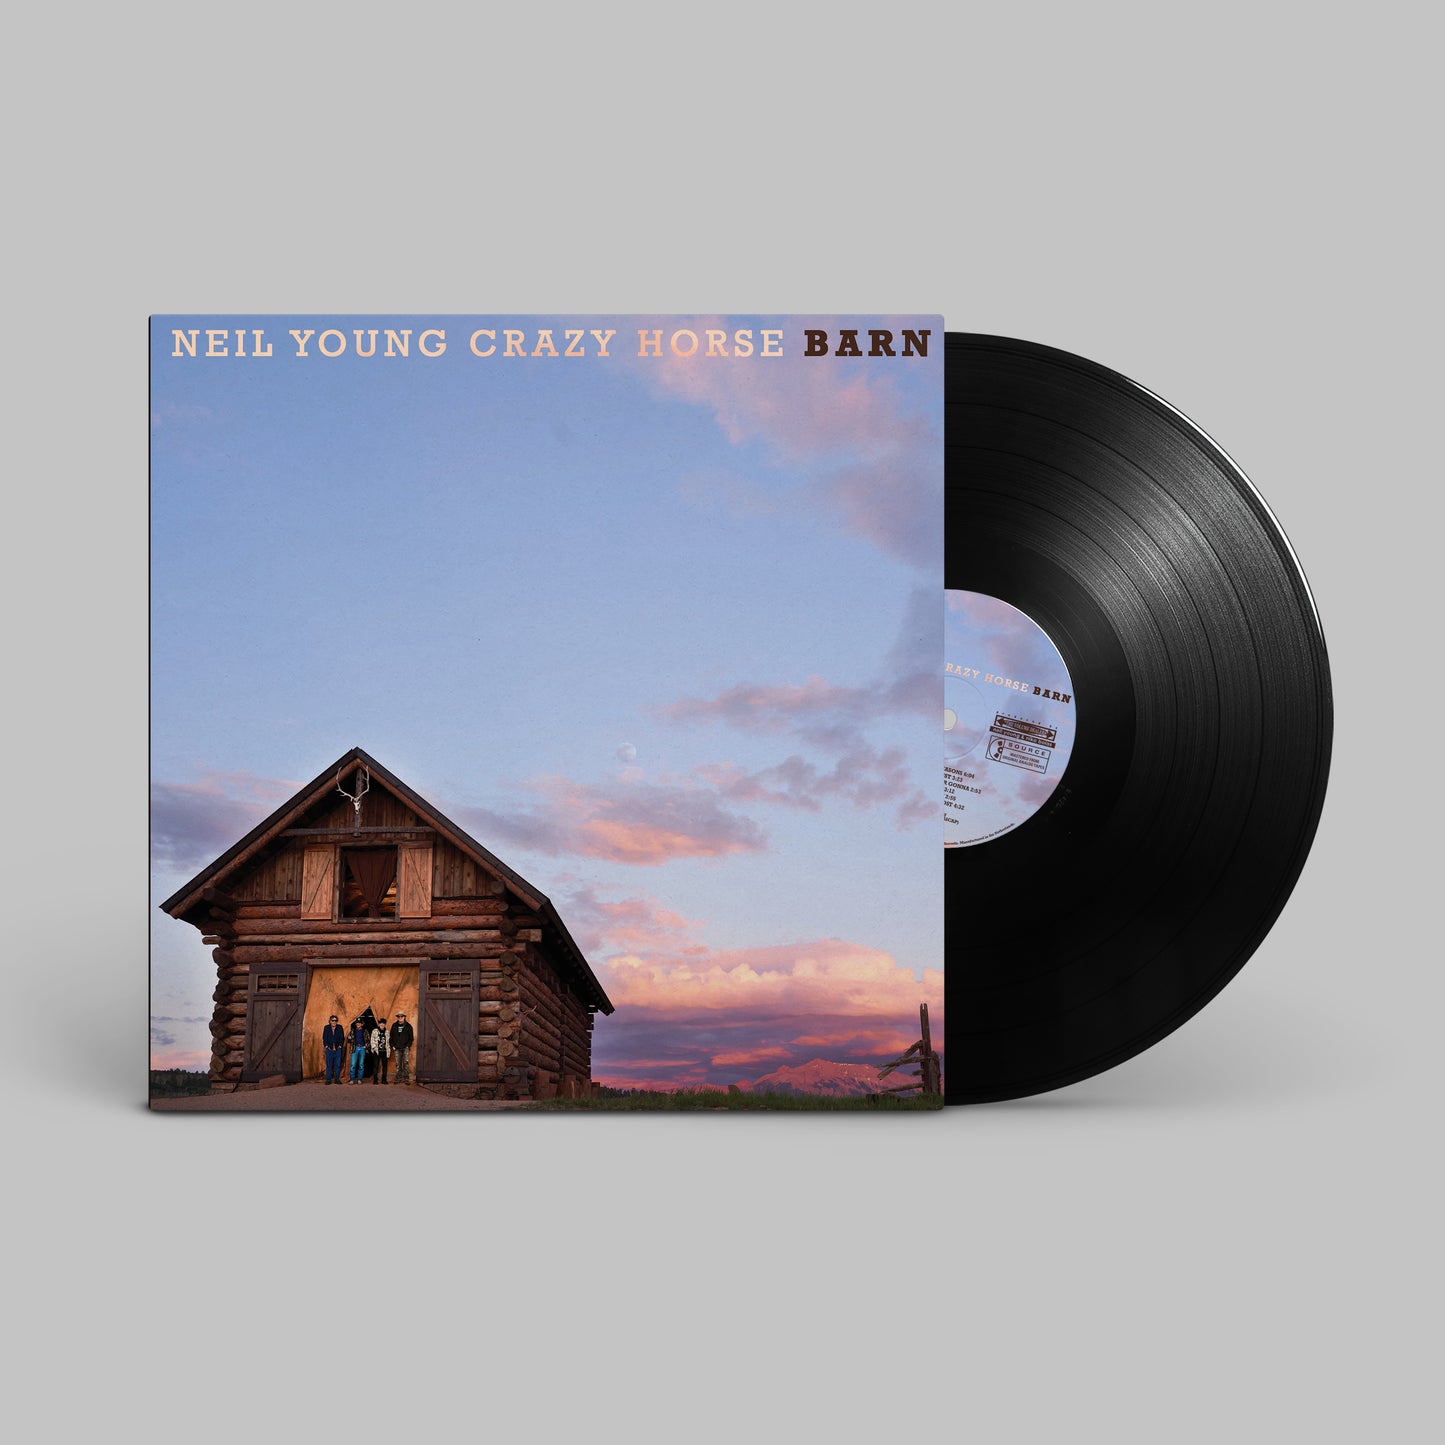 Neil Young & Crazy Horse - Barn (Indie Exclusive, Special Edition, Photo Book) - Vinyl